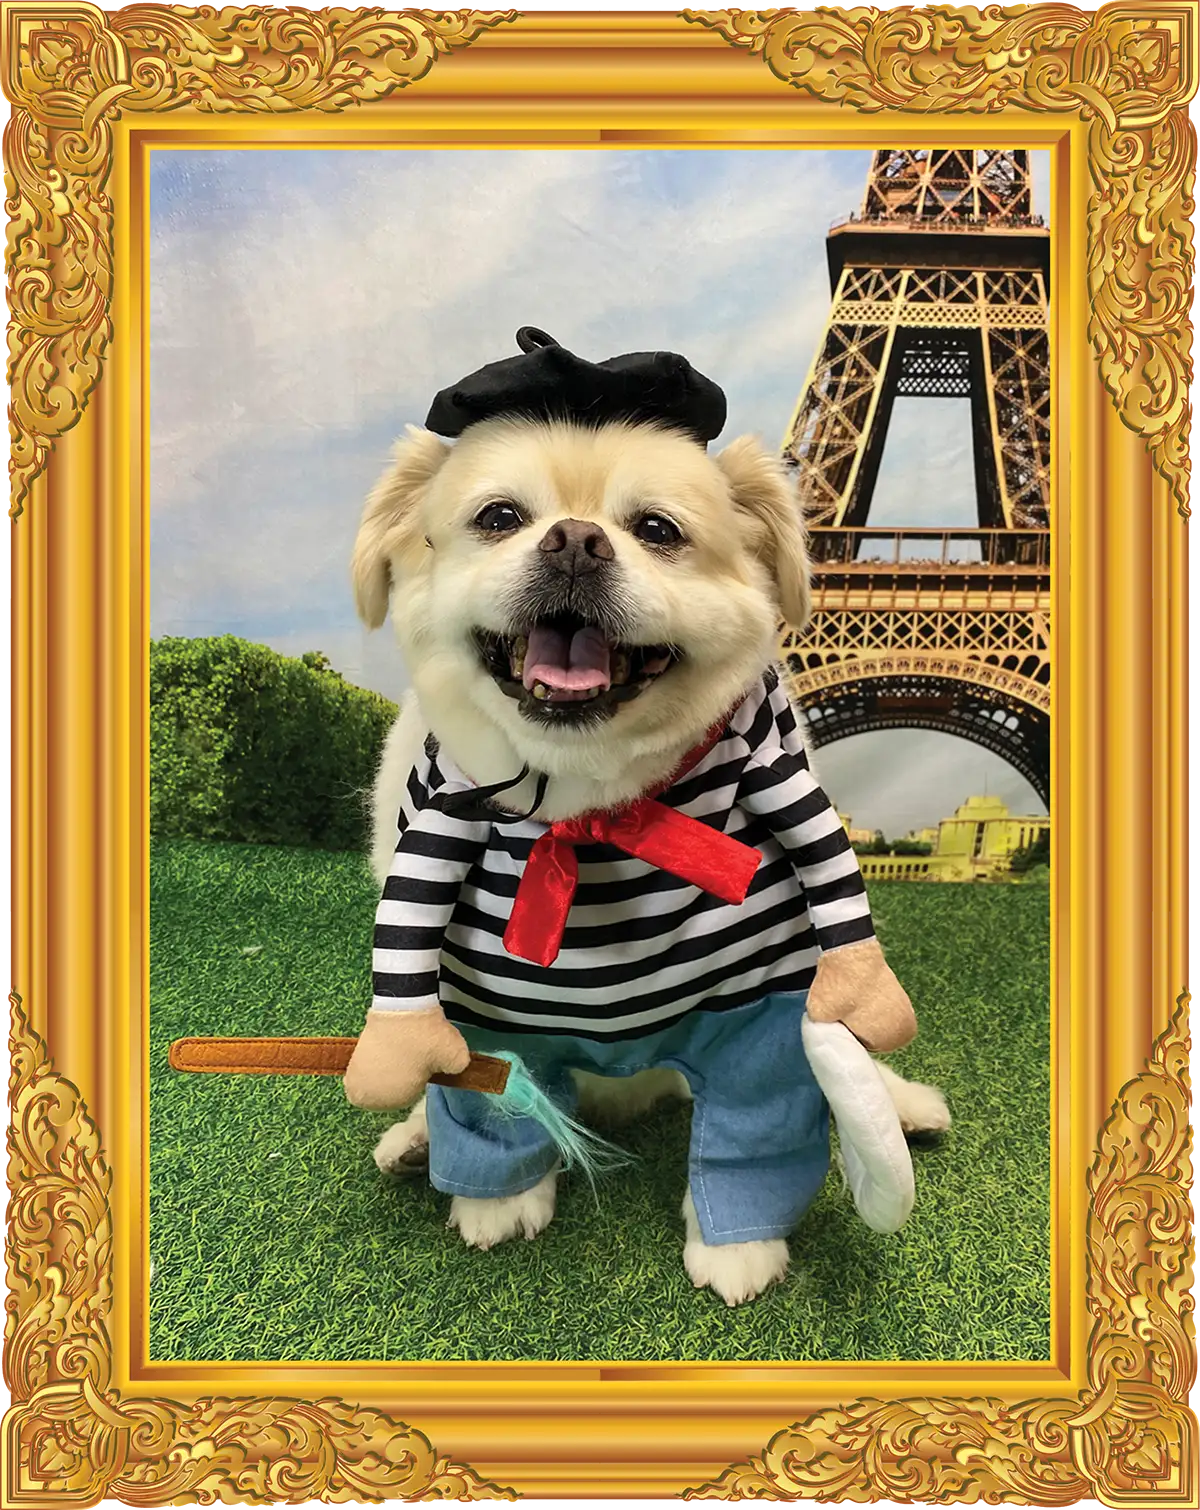 Beethoven dressed in french style clothing with a gold frame